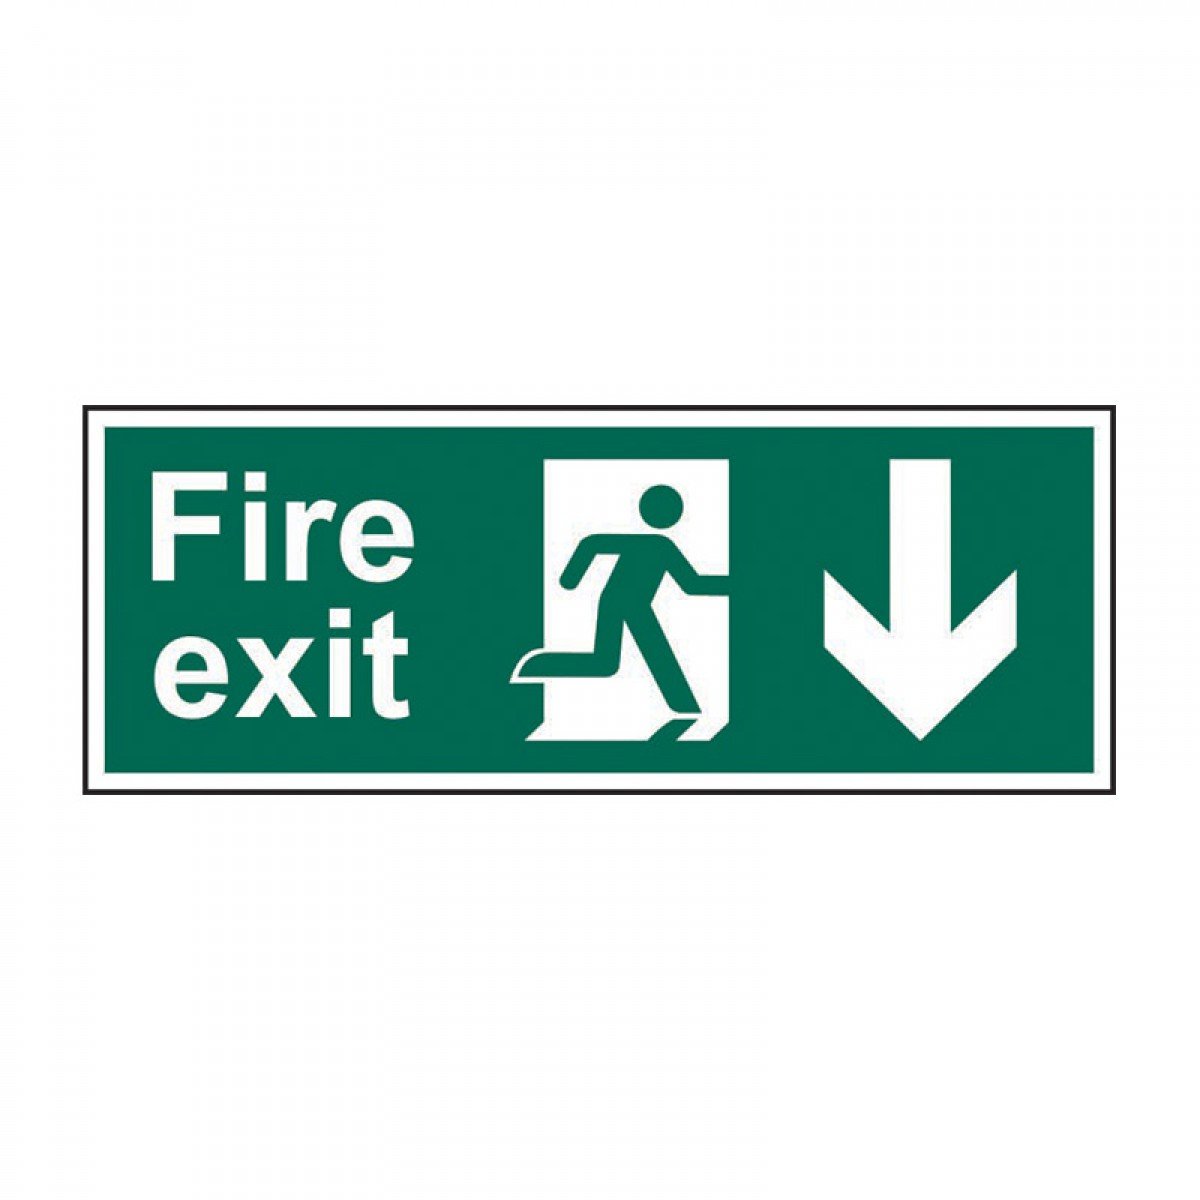 Fire Exit (Man Arrow Down) Sign, Green/White 400mmx150mm